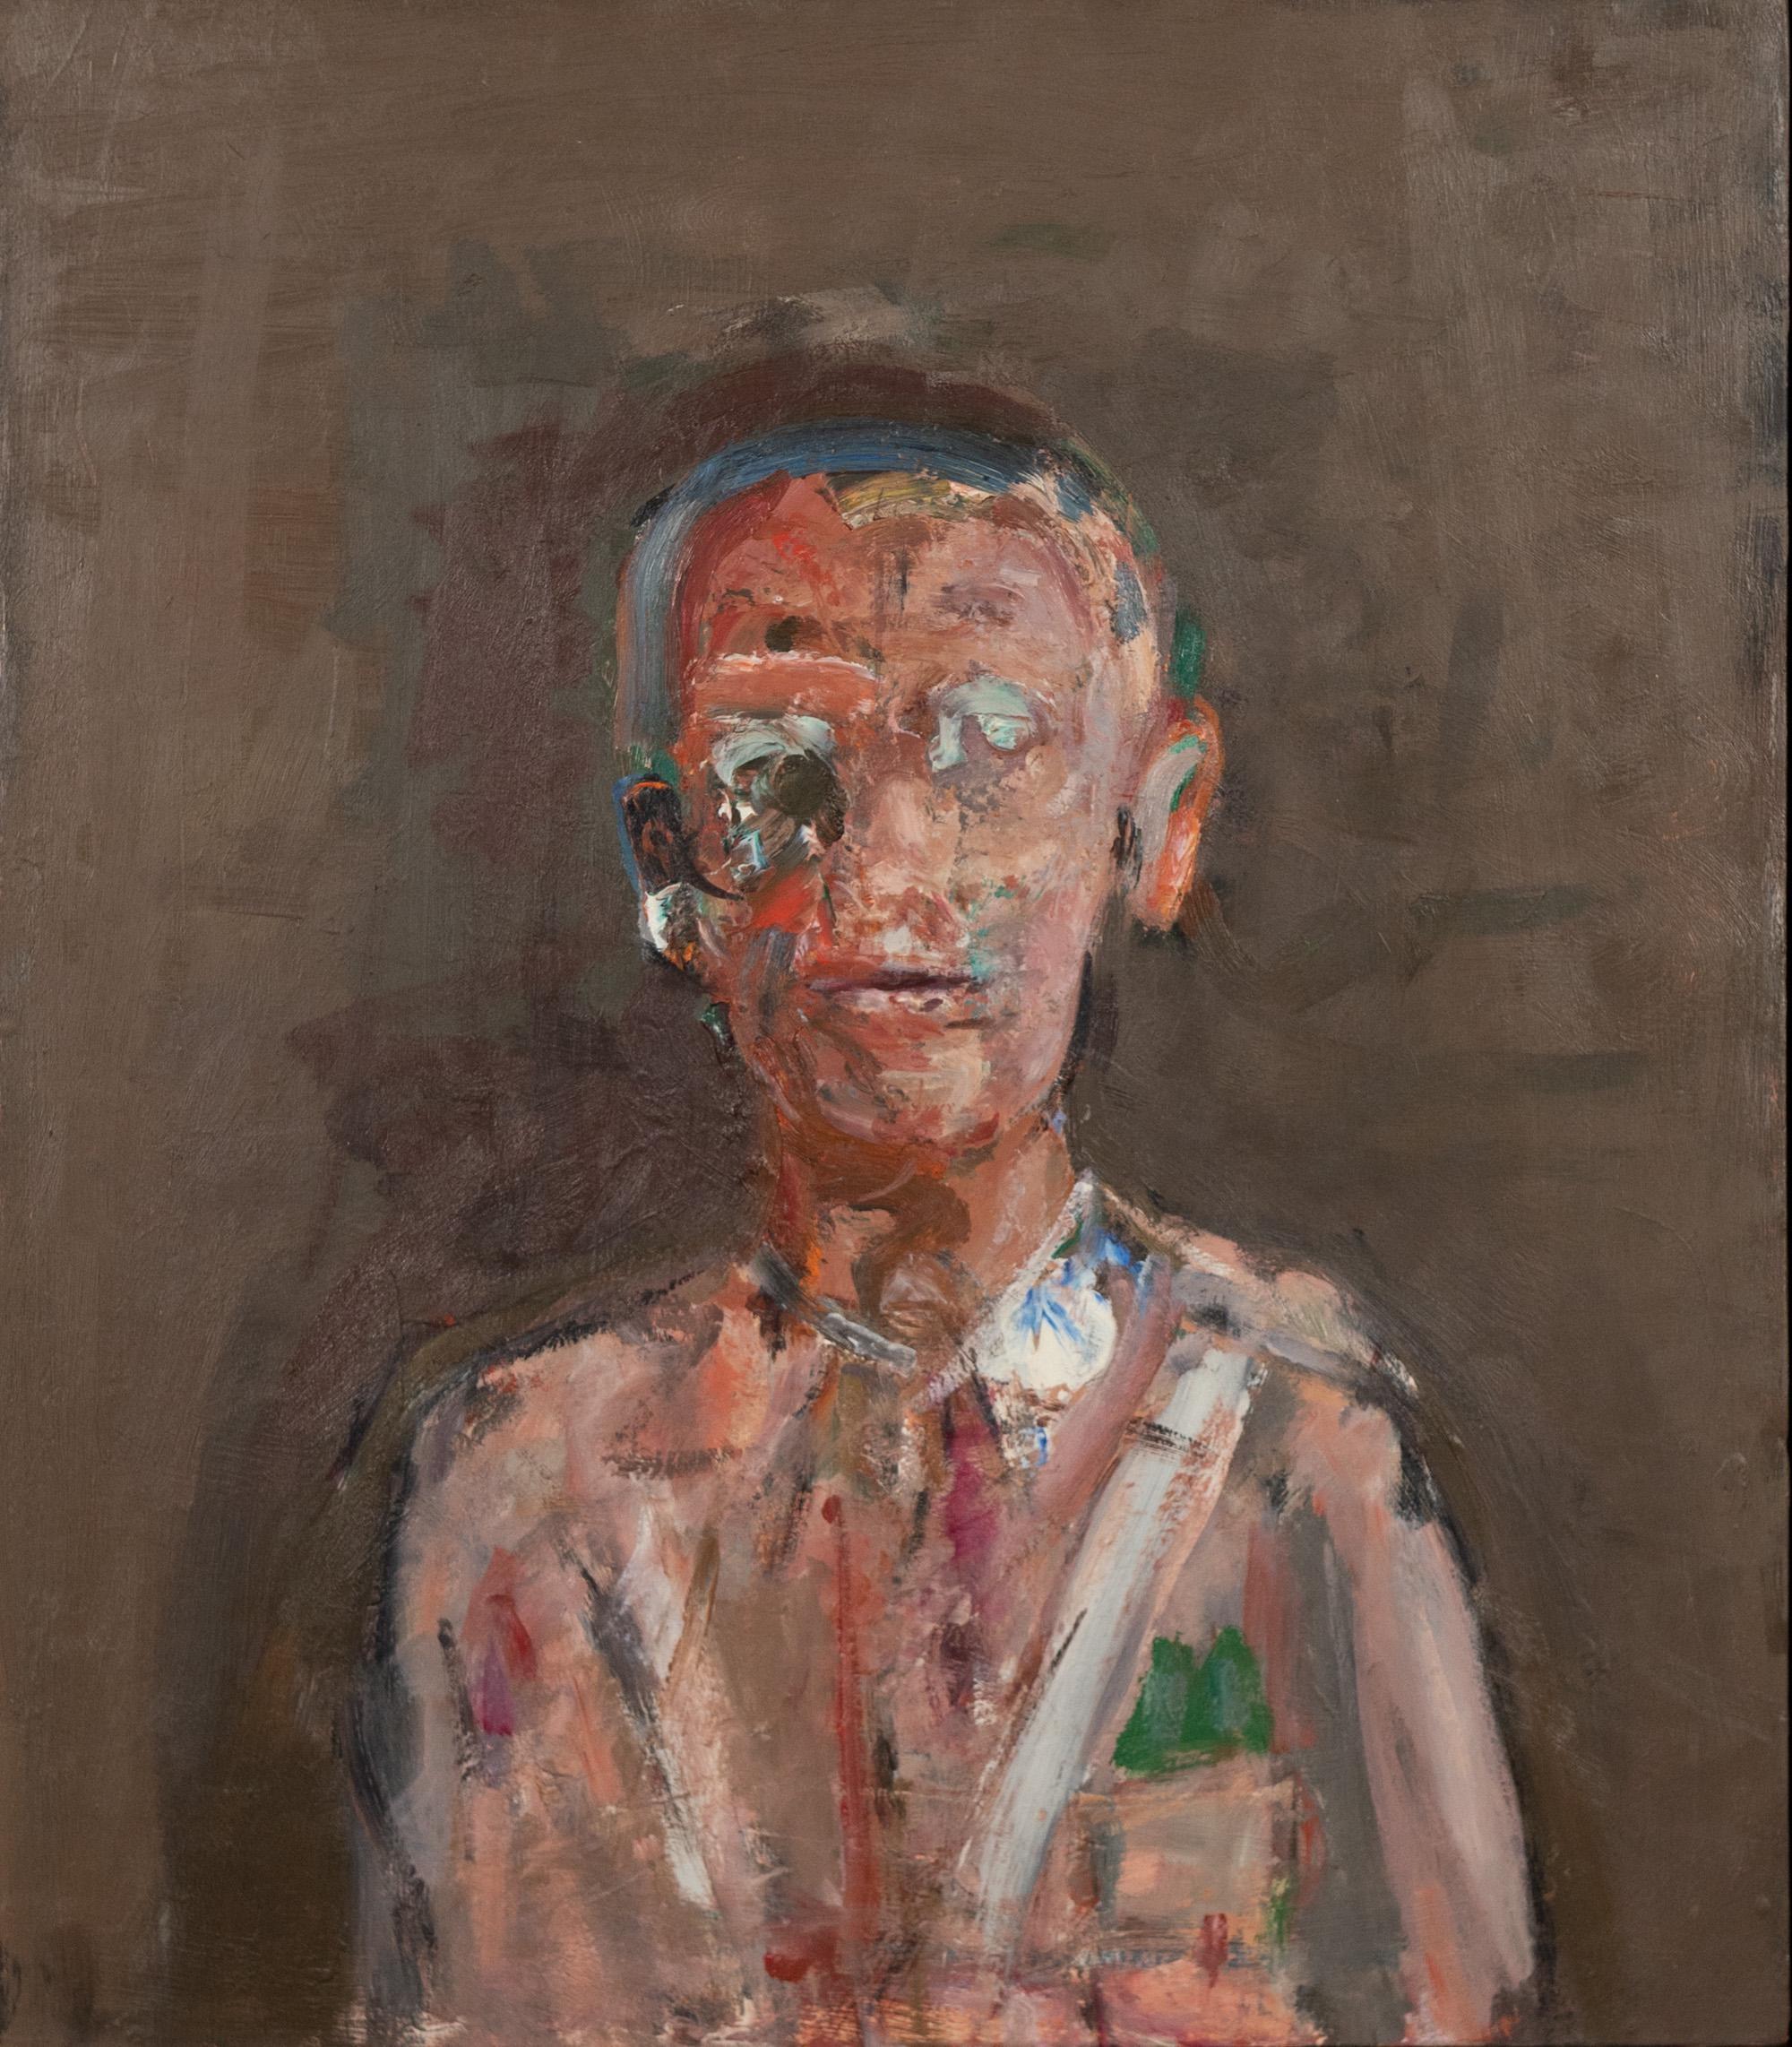 Military Man Portrait Figurative Abstract Oil Painting American Modernist Artist - Brown Figurative Painting by Dean Richardson